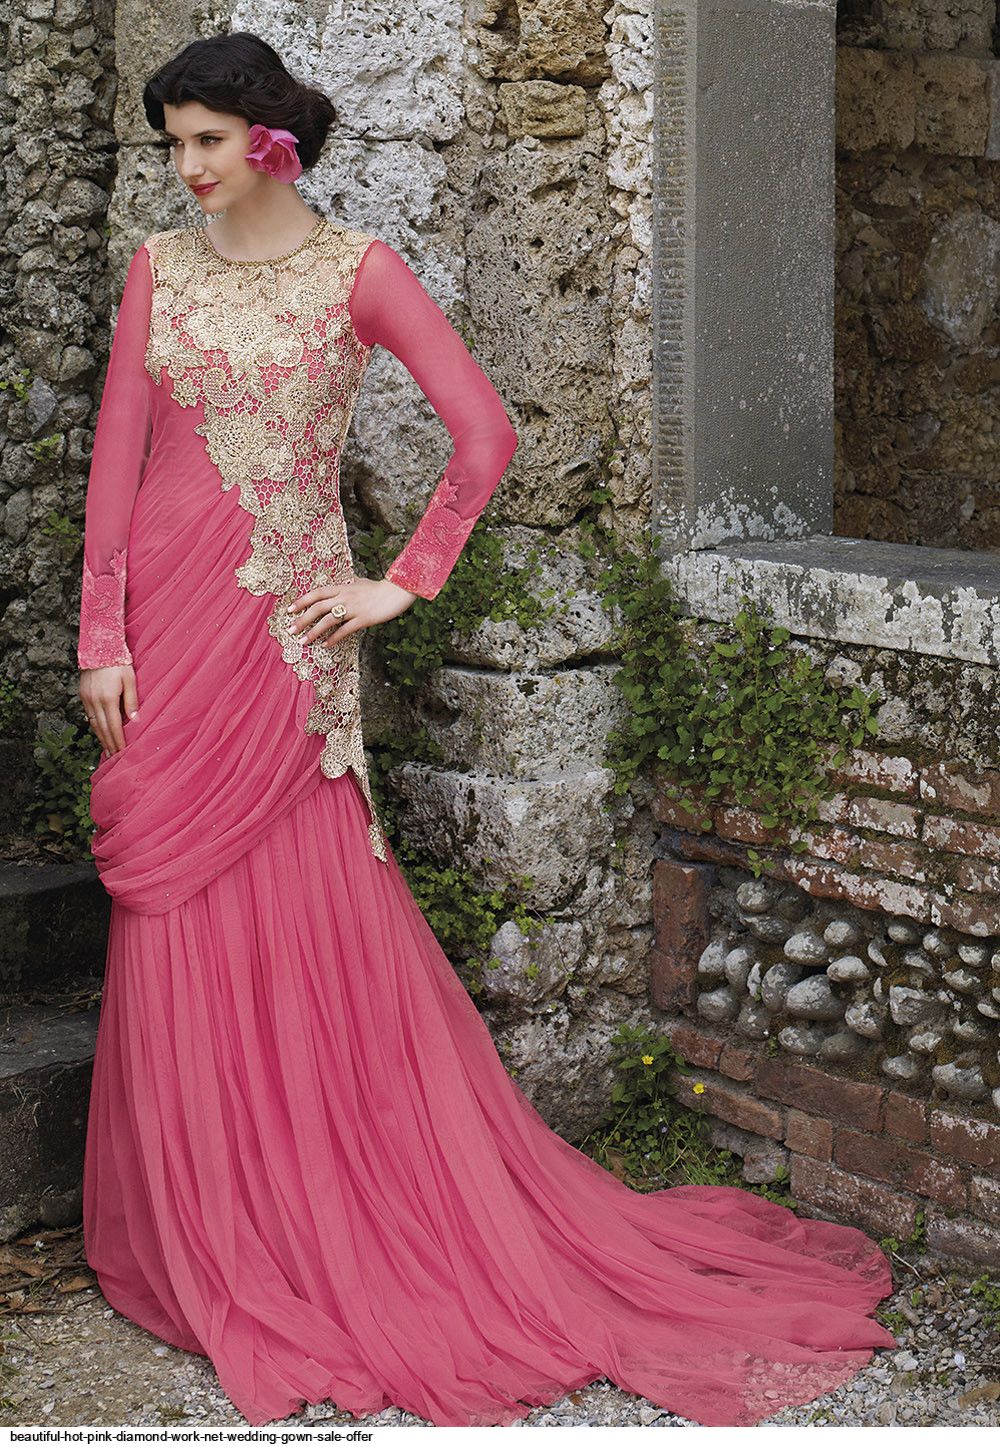 Latest Collection of Girls' Beautiful Gowns Online - Richous